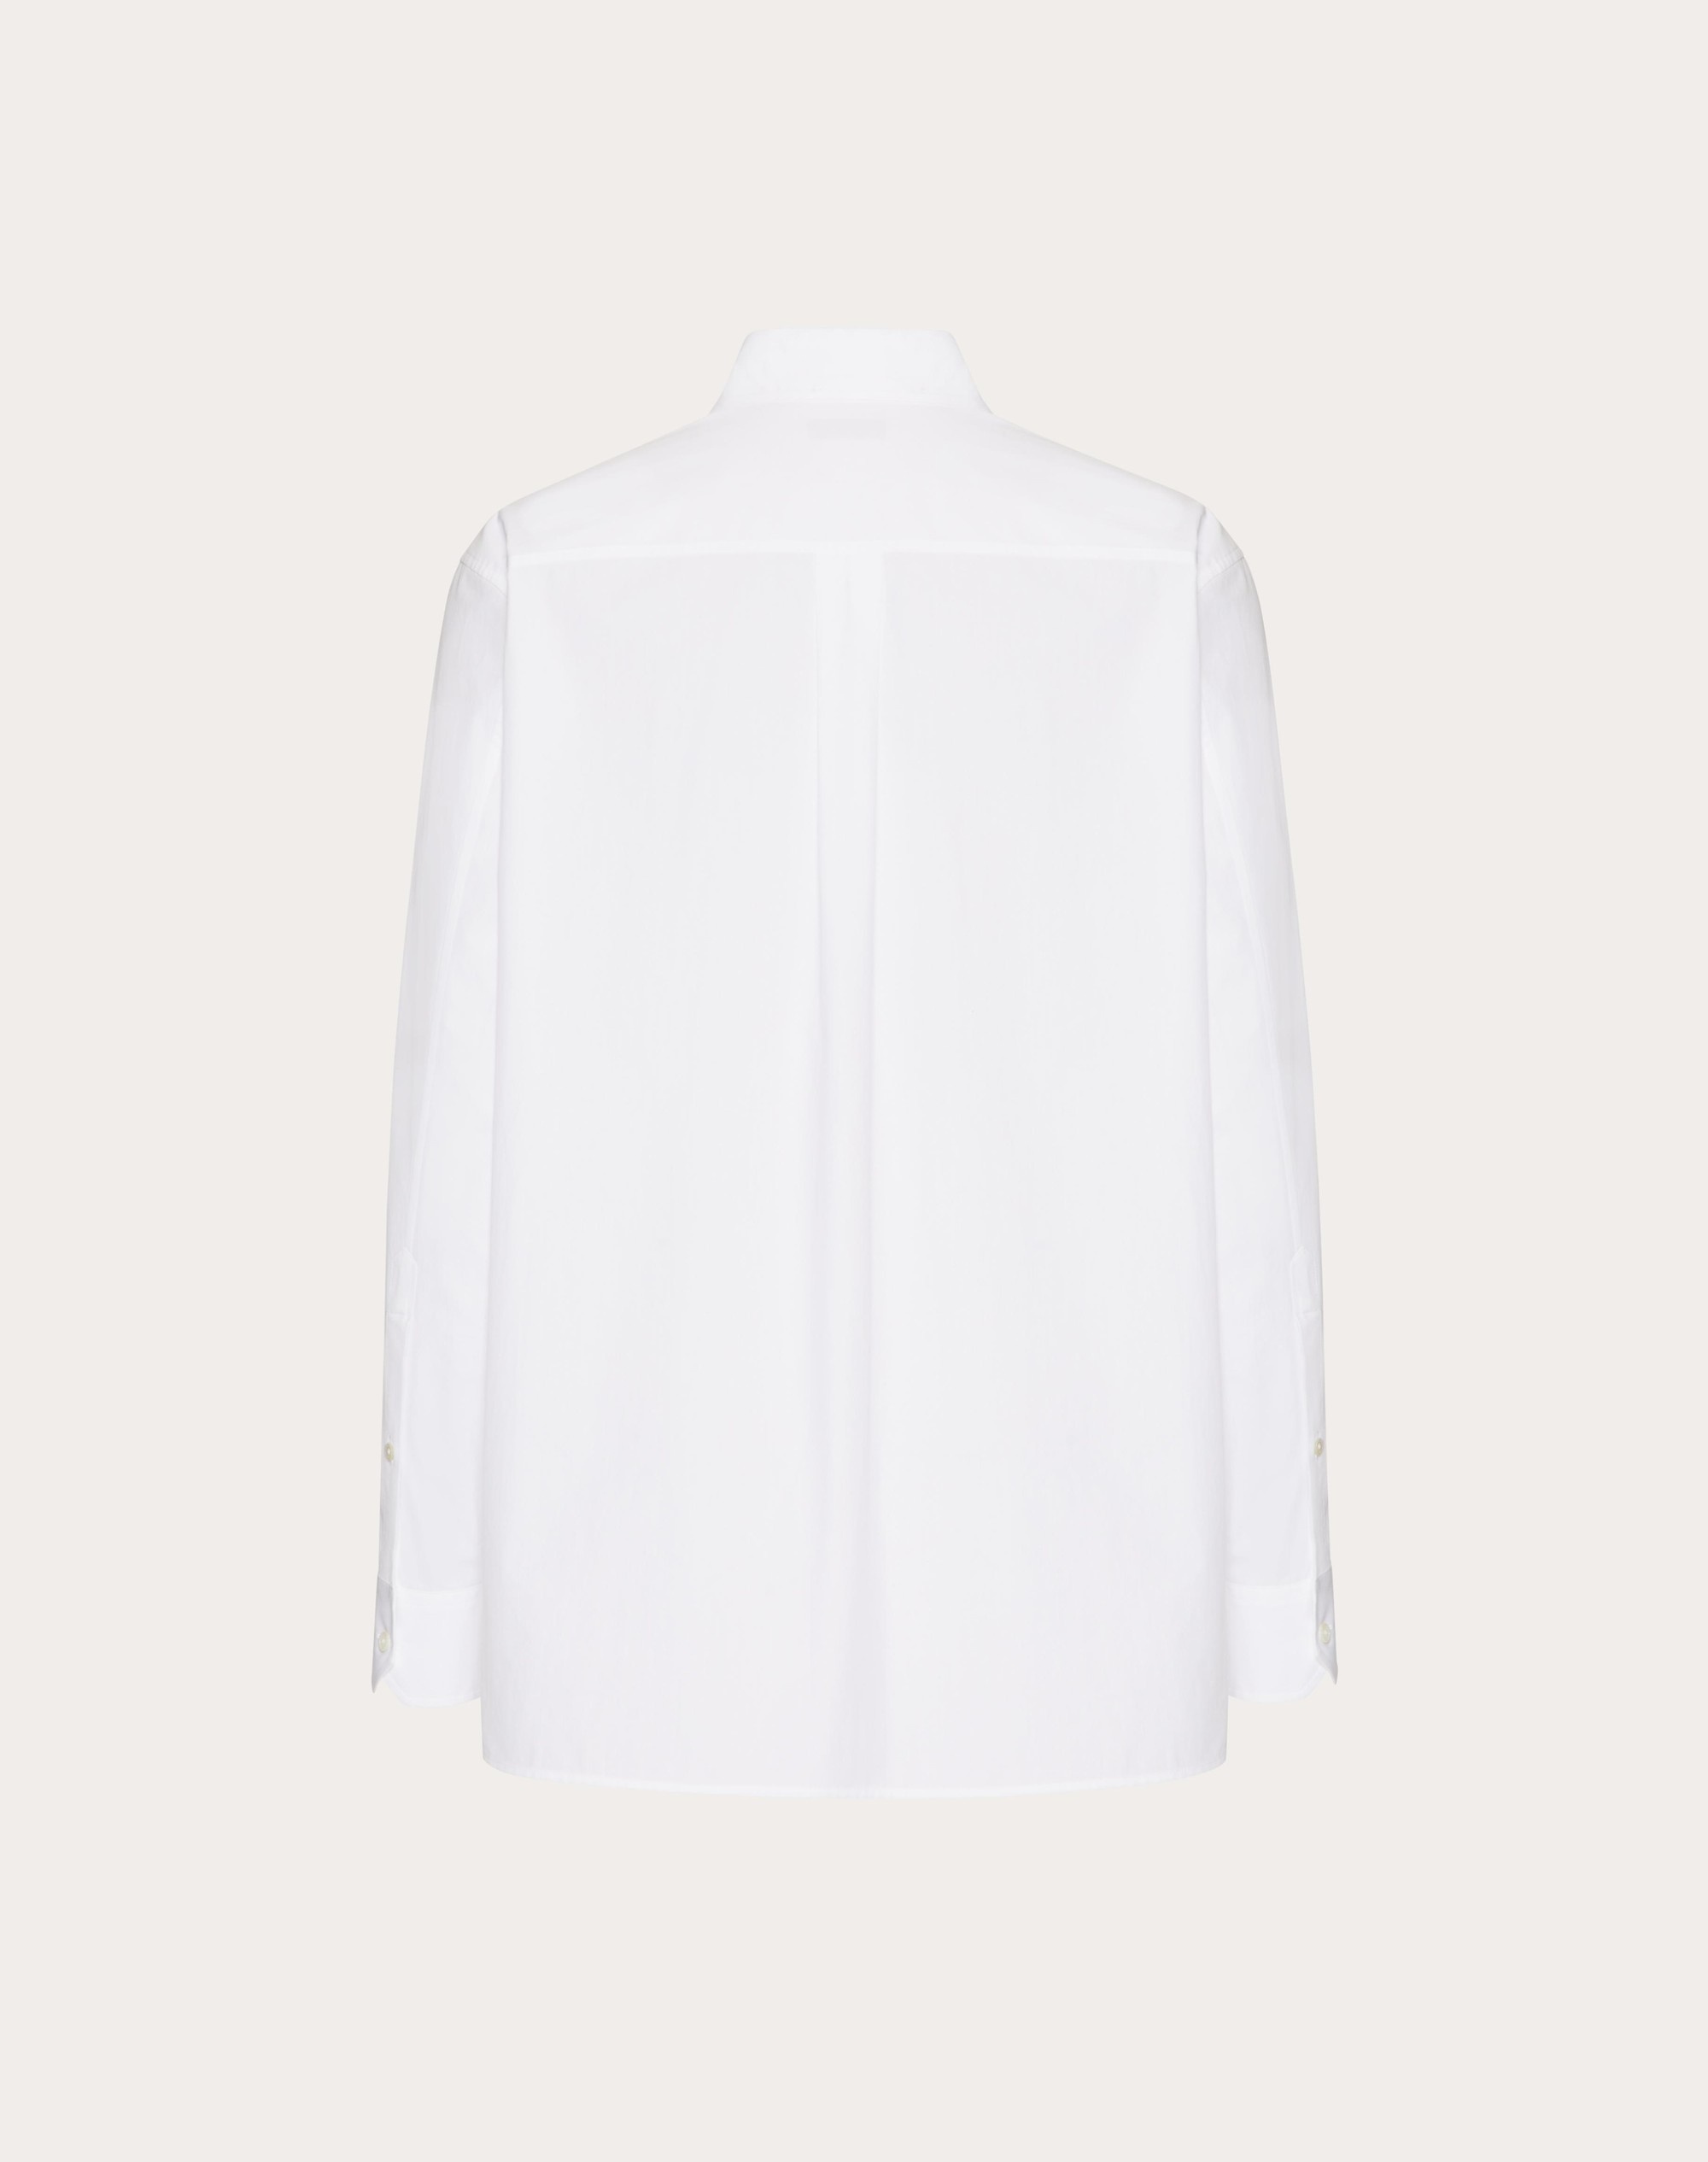 LONG SLEEVE COTTON SHIRT WITH MAISON VALENTINO TAILORING LABEL - 2